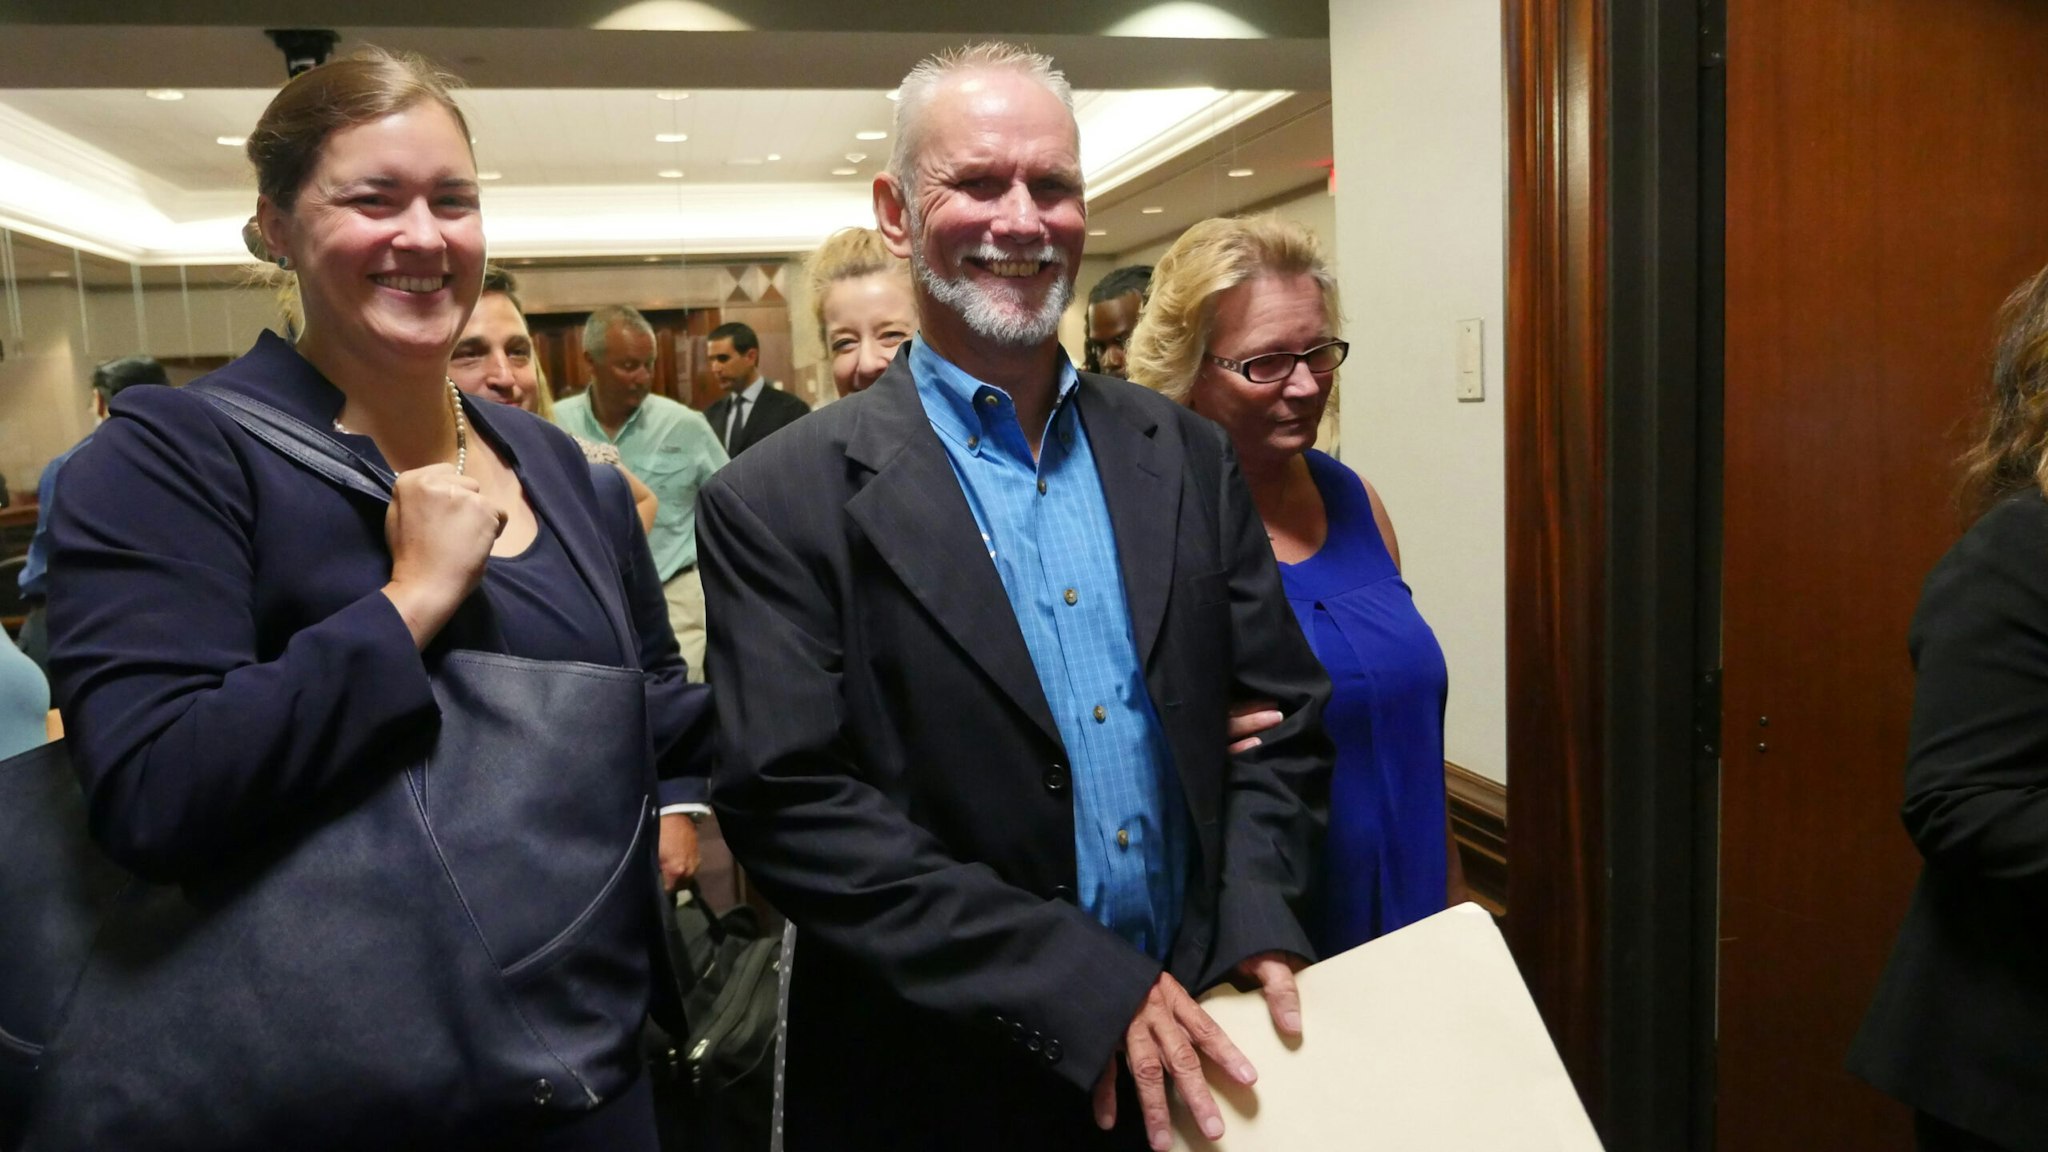 Dennis Perry, 59, smiles as he leaves the courtroom after being exonerated for a murder he didn't commit.